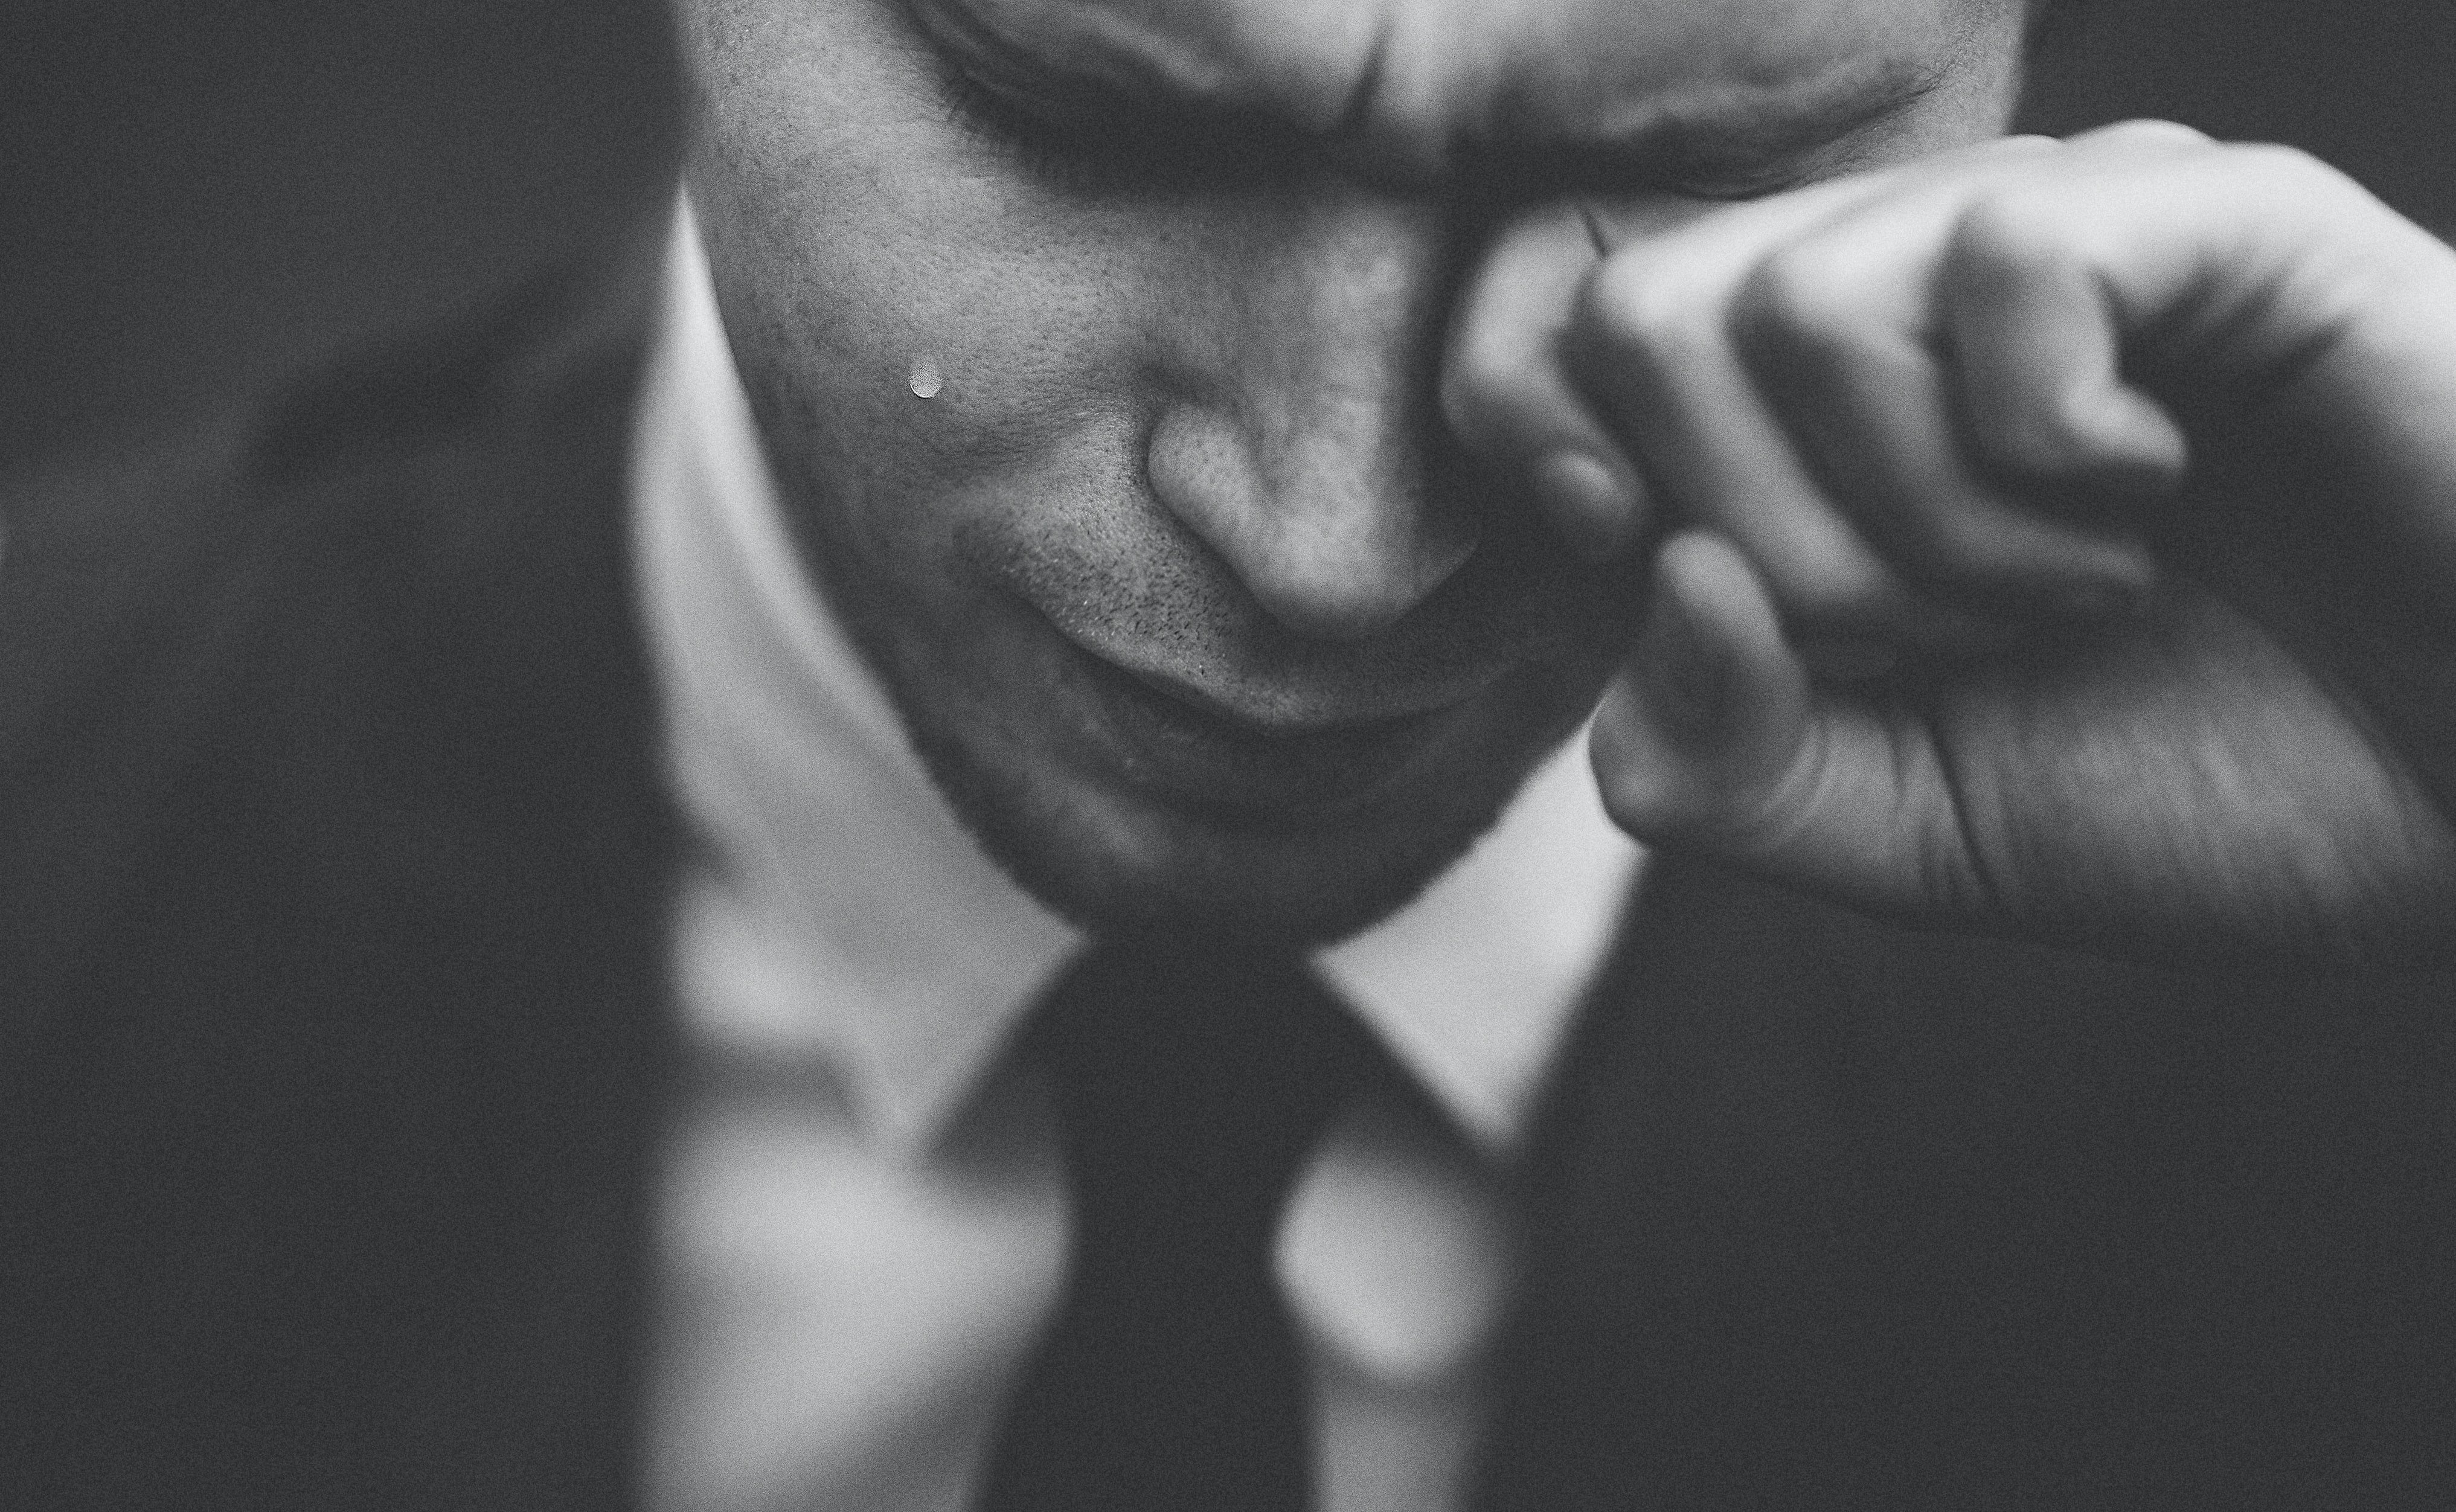 Edward couldn't control his tears while sharing his tragic story. | Source: Unsplash